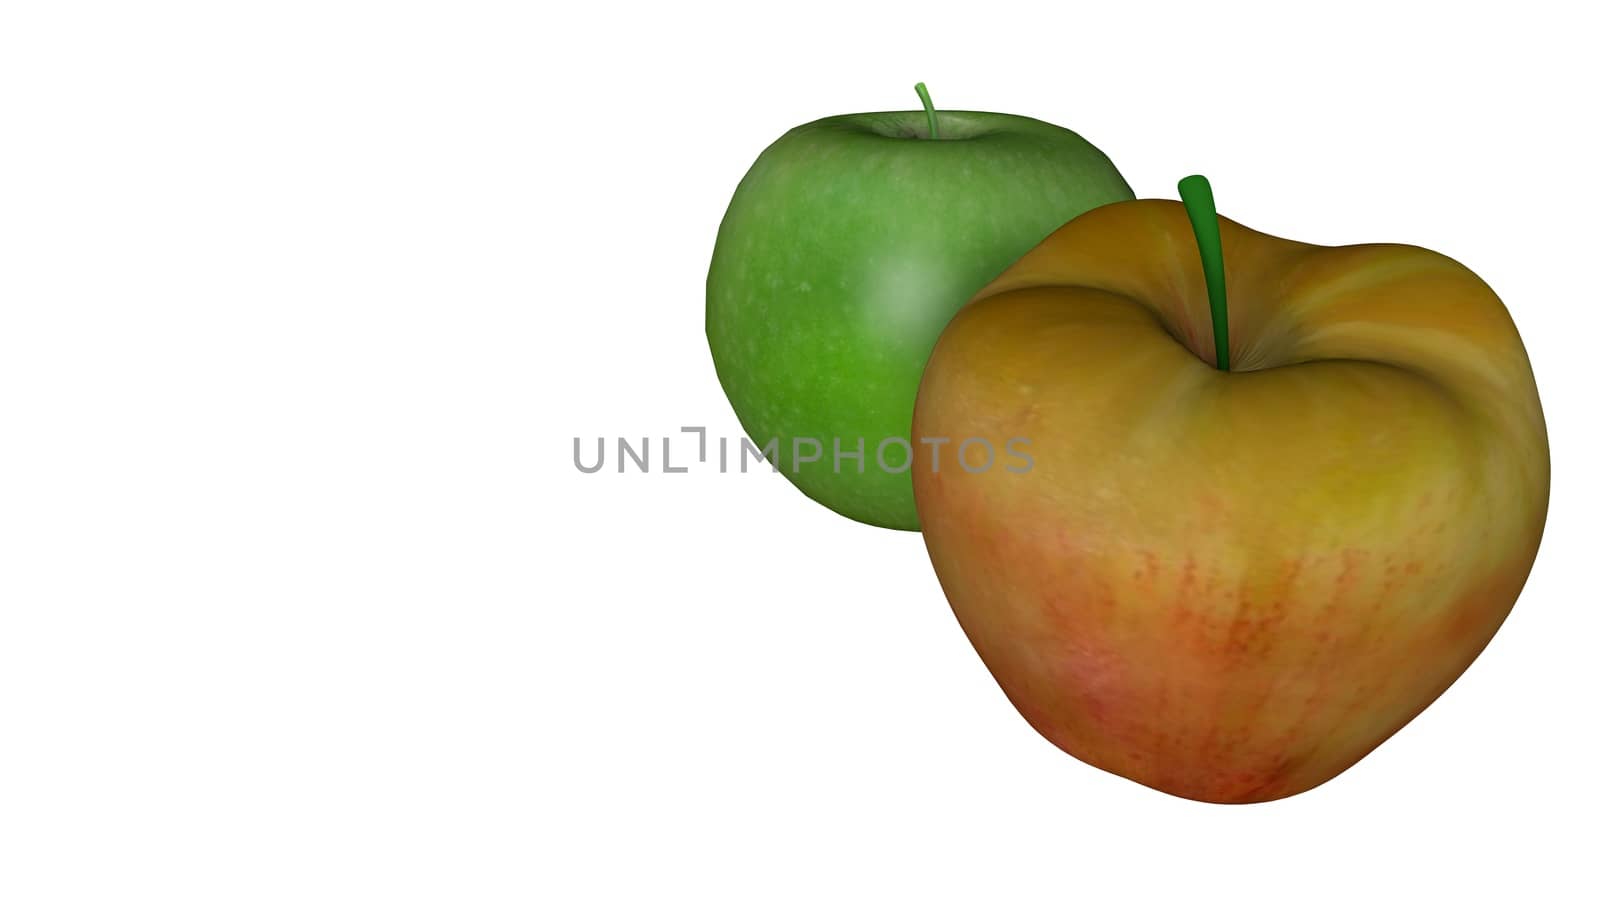 Red apple and green apple isolated on white background by Photochowk